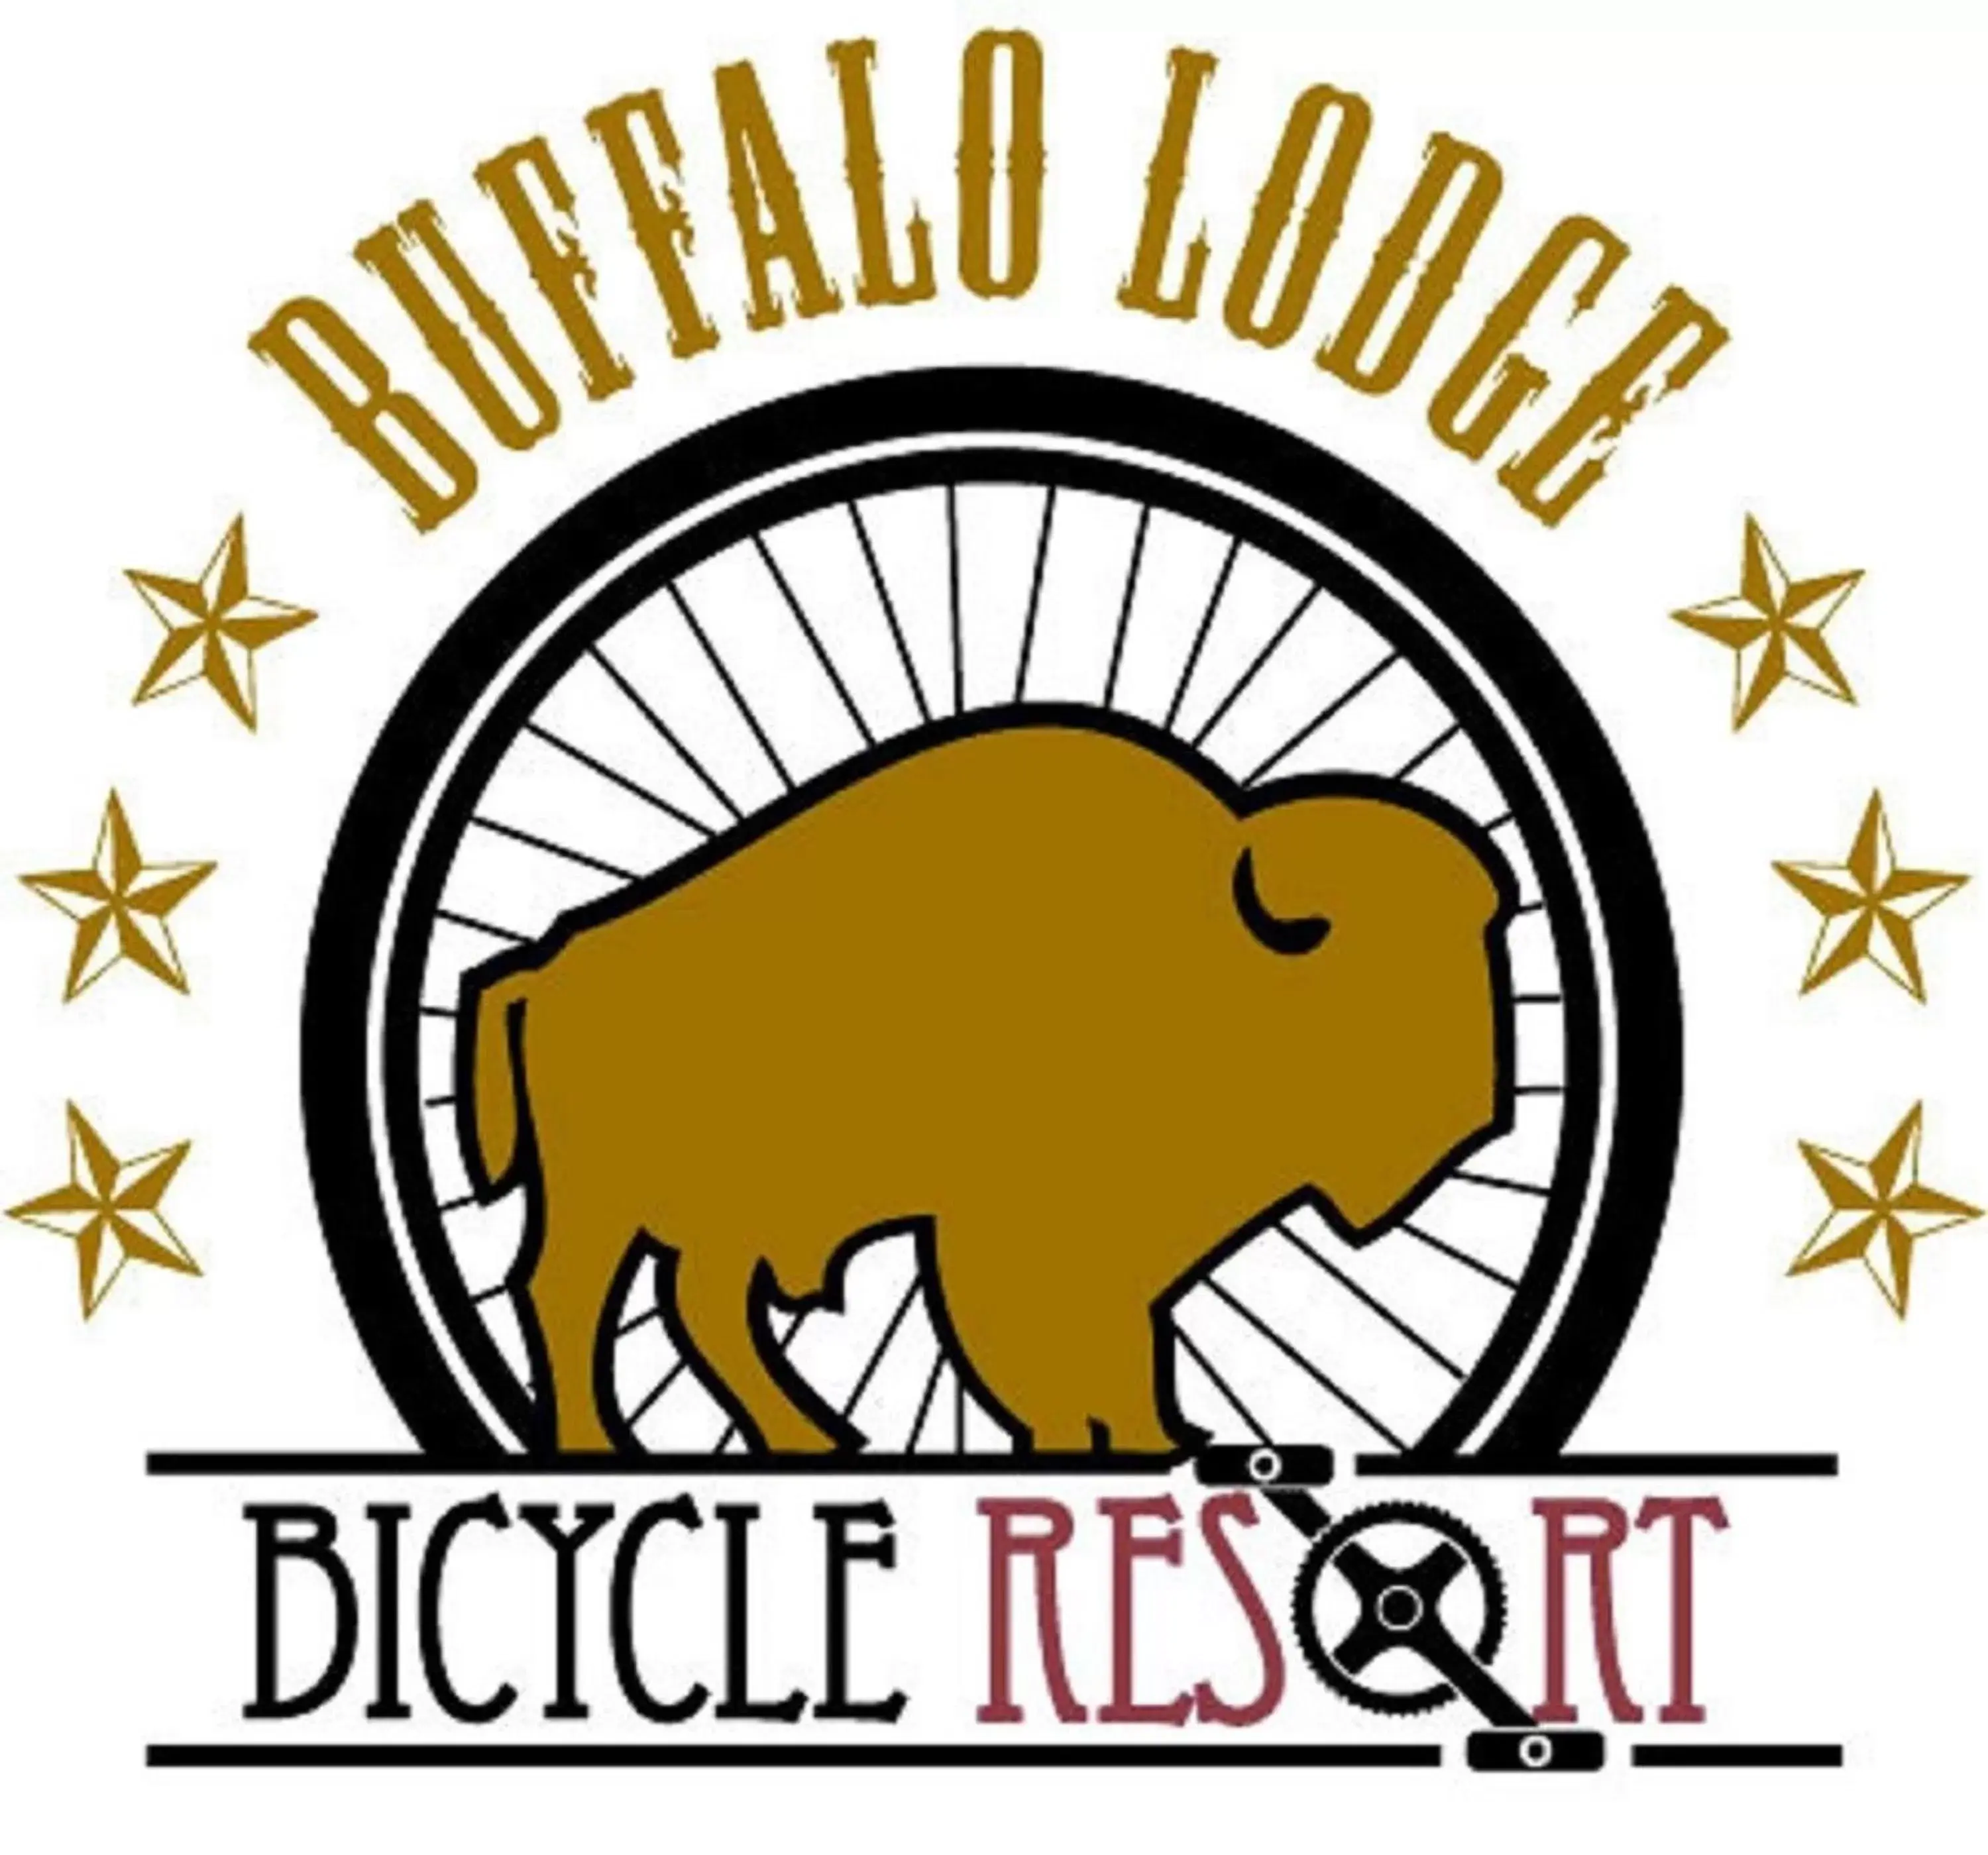 Property logo or sign, Property Logo/Sign in Buffalo Lodge Bicycle Resort - Amazing access to local trails & the Garden